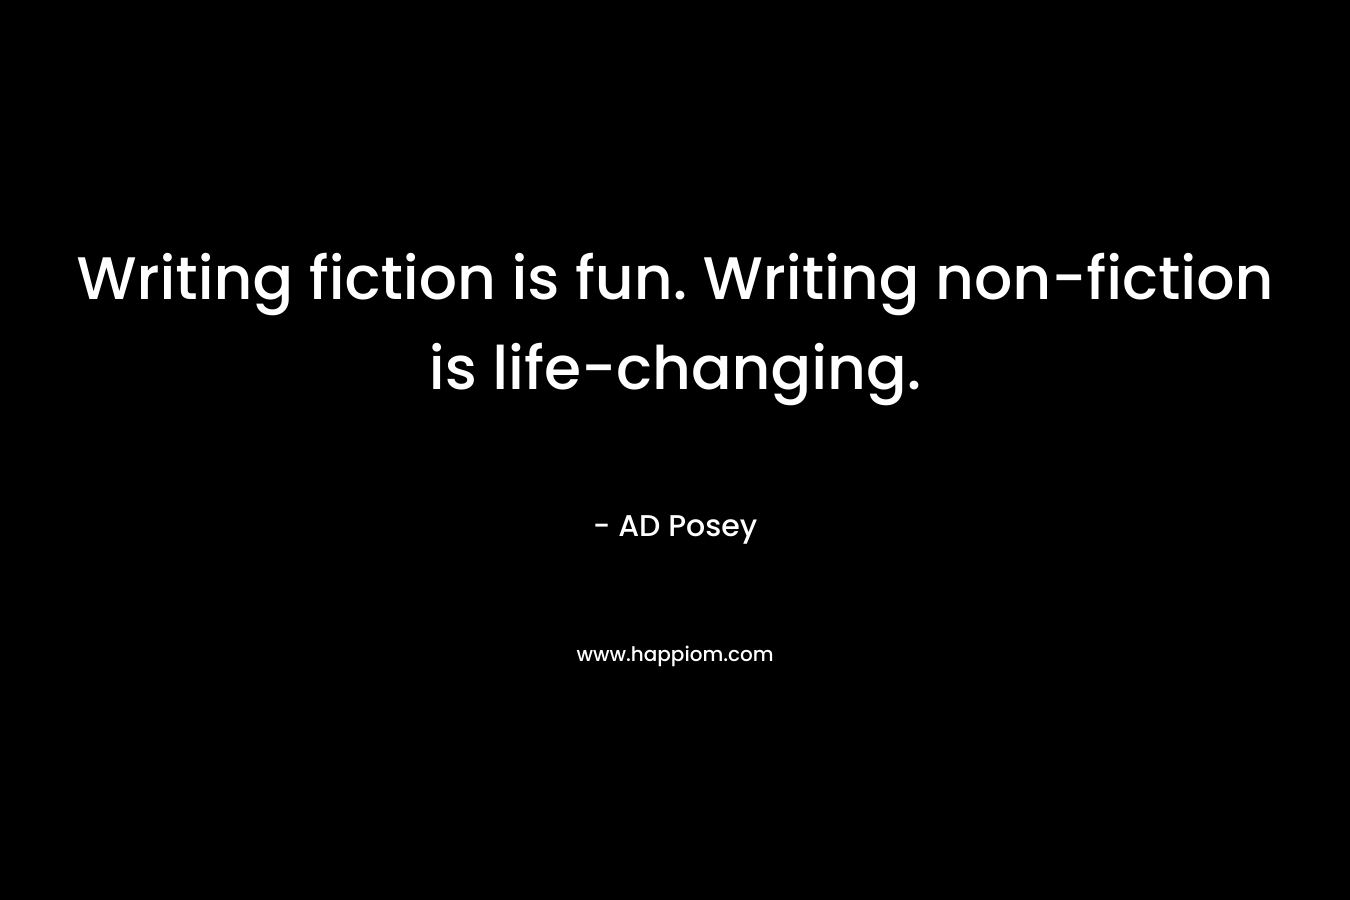 Writing fiction is fun. Writing non-fiction is life-changing. – AD Posey